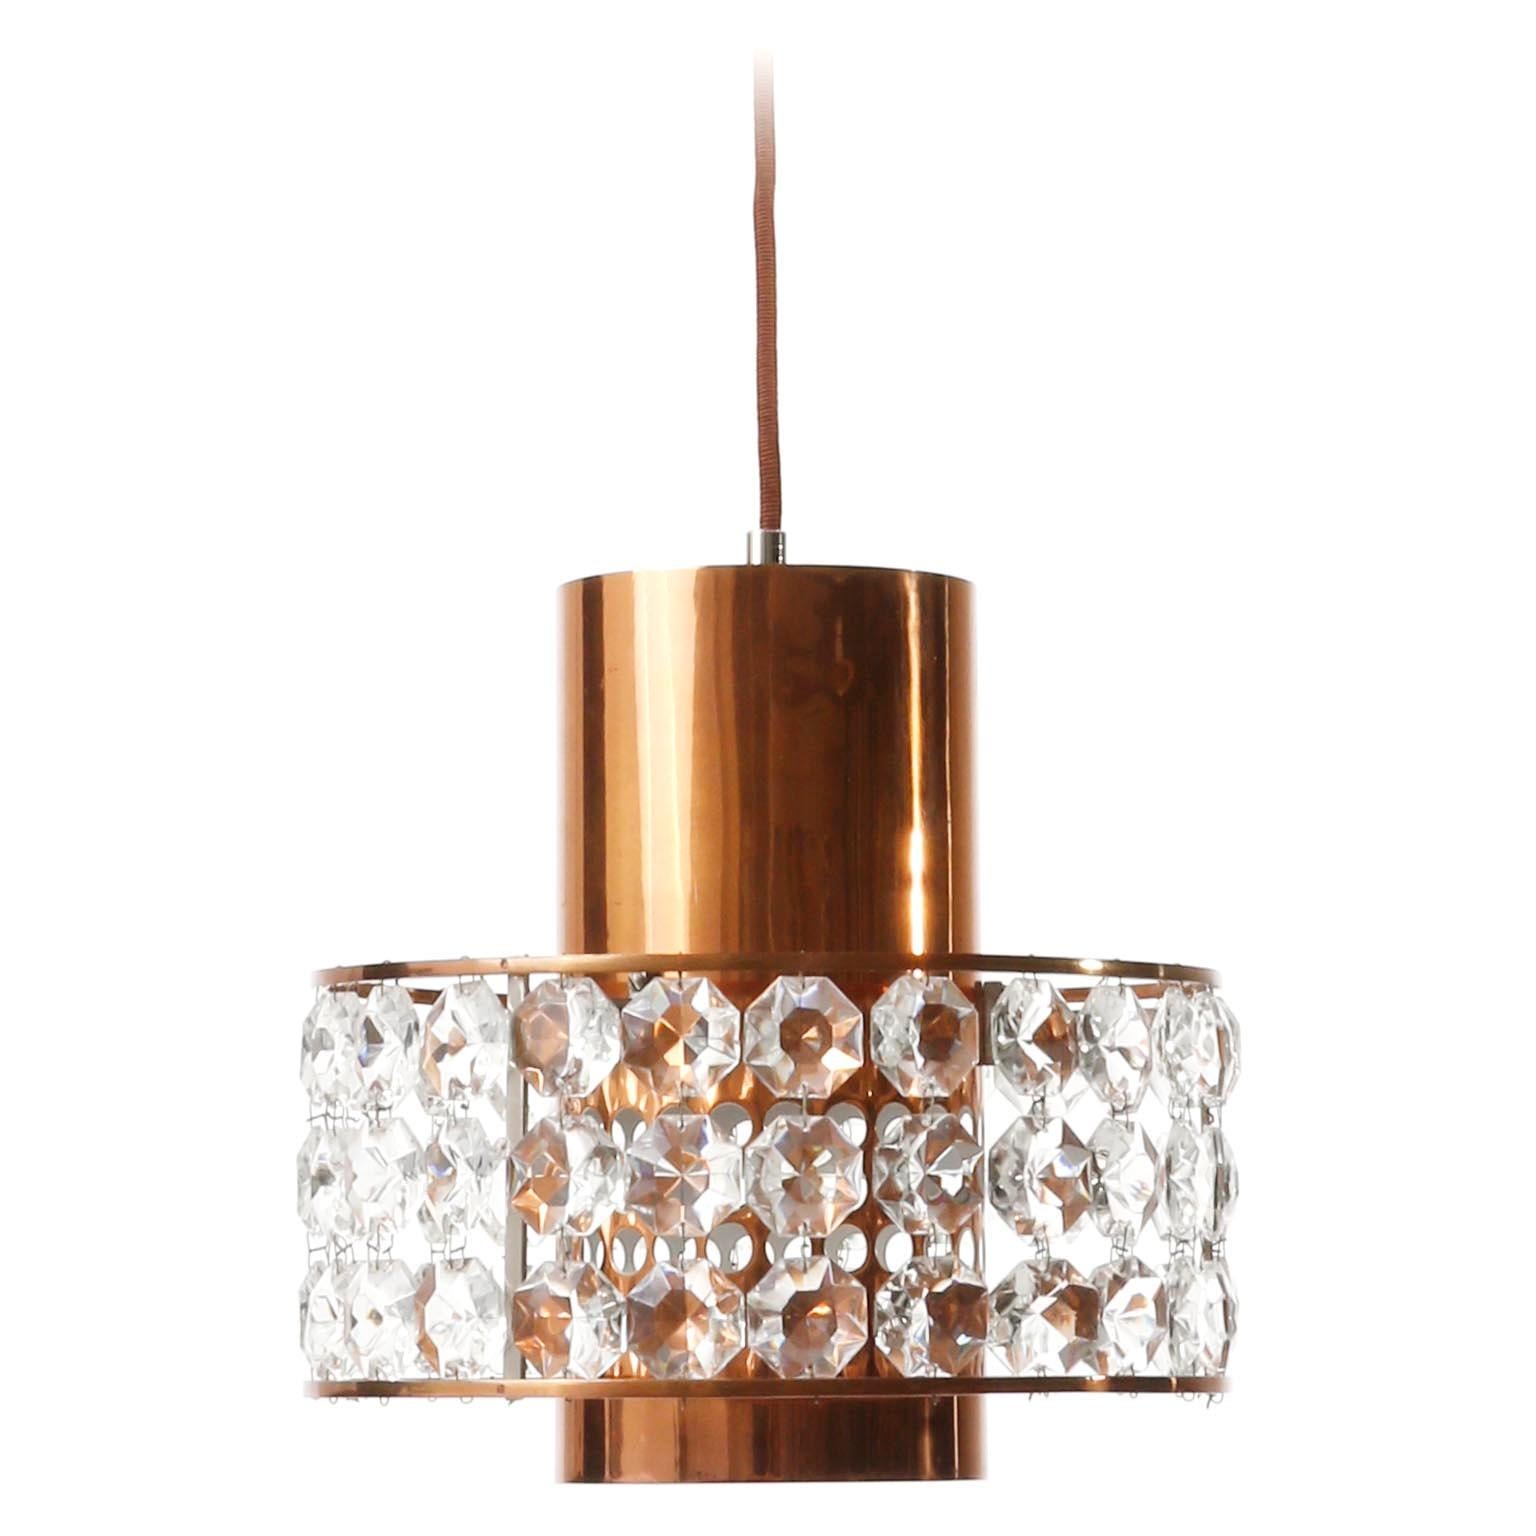 Mid-Century Modern 1 of 3 Bakalowits Pendant Lights Lanterns, Copper Nickel Crystal Glass, 1960s For Sale